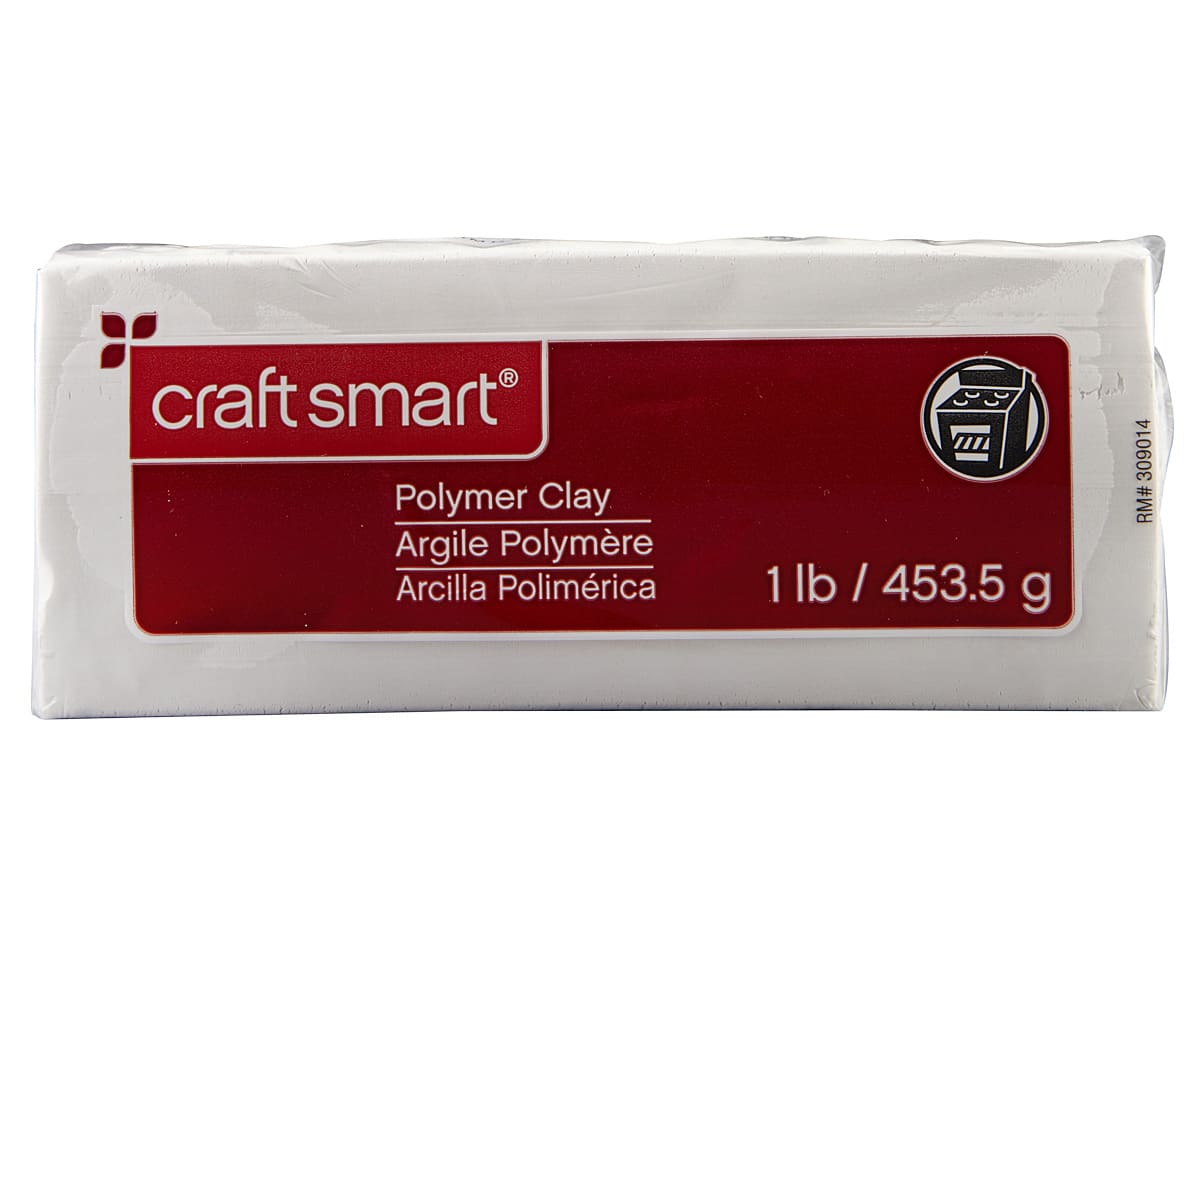 6 Pack: 3lb. White Oven-Bake Polymer Clay by Craft Smart